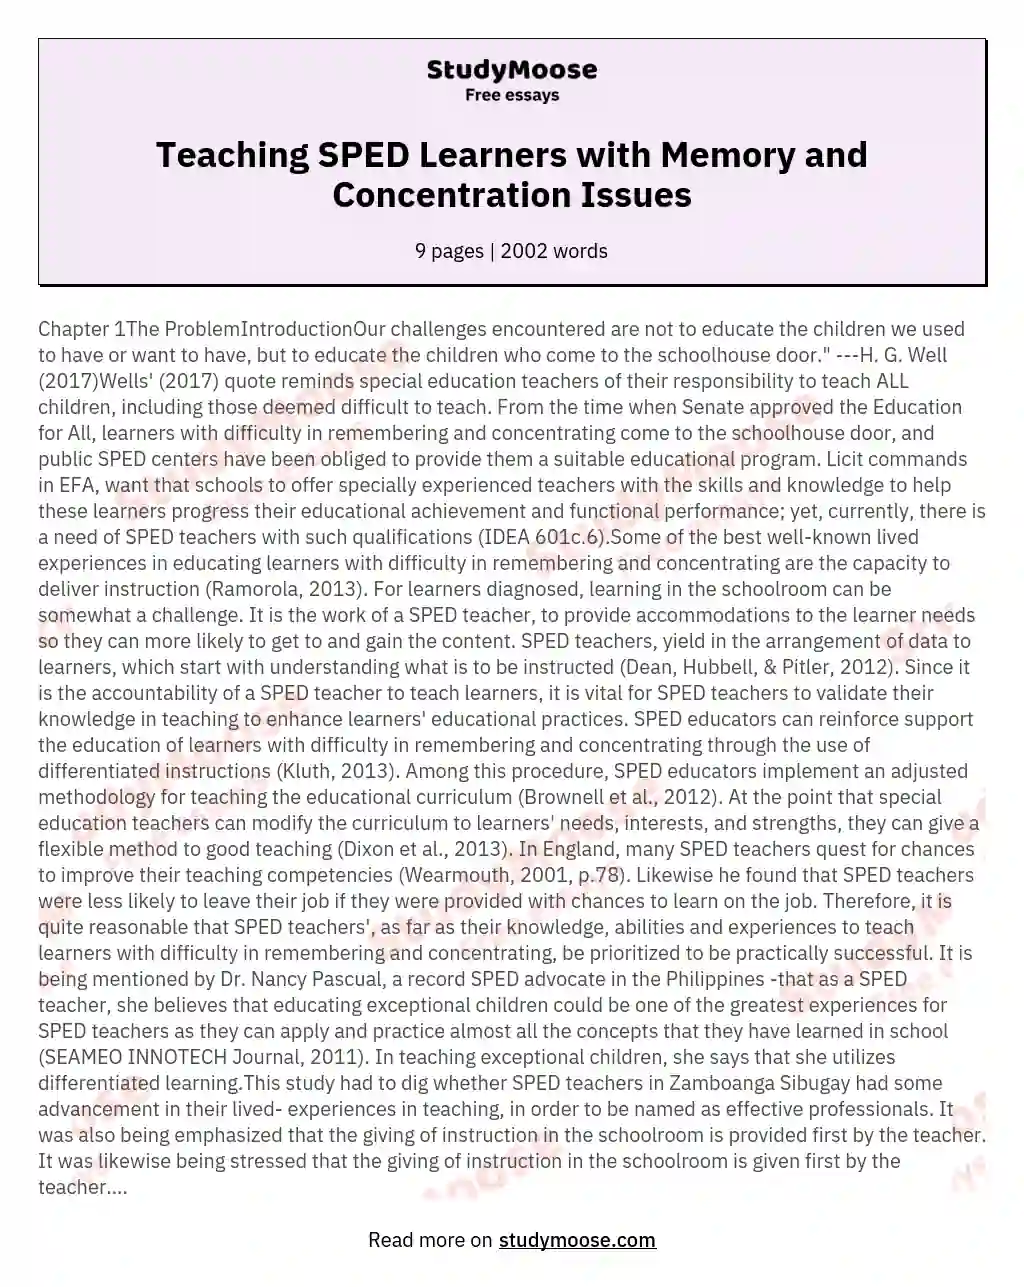 LIVED EXPERIENCES OF SPED TEACHERS TEACHING LEARNERS WITH DIFFICULTY IN REMEMBERING AND CONCENTRATING